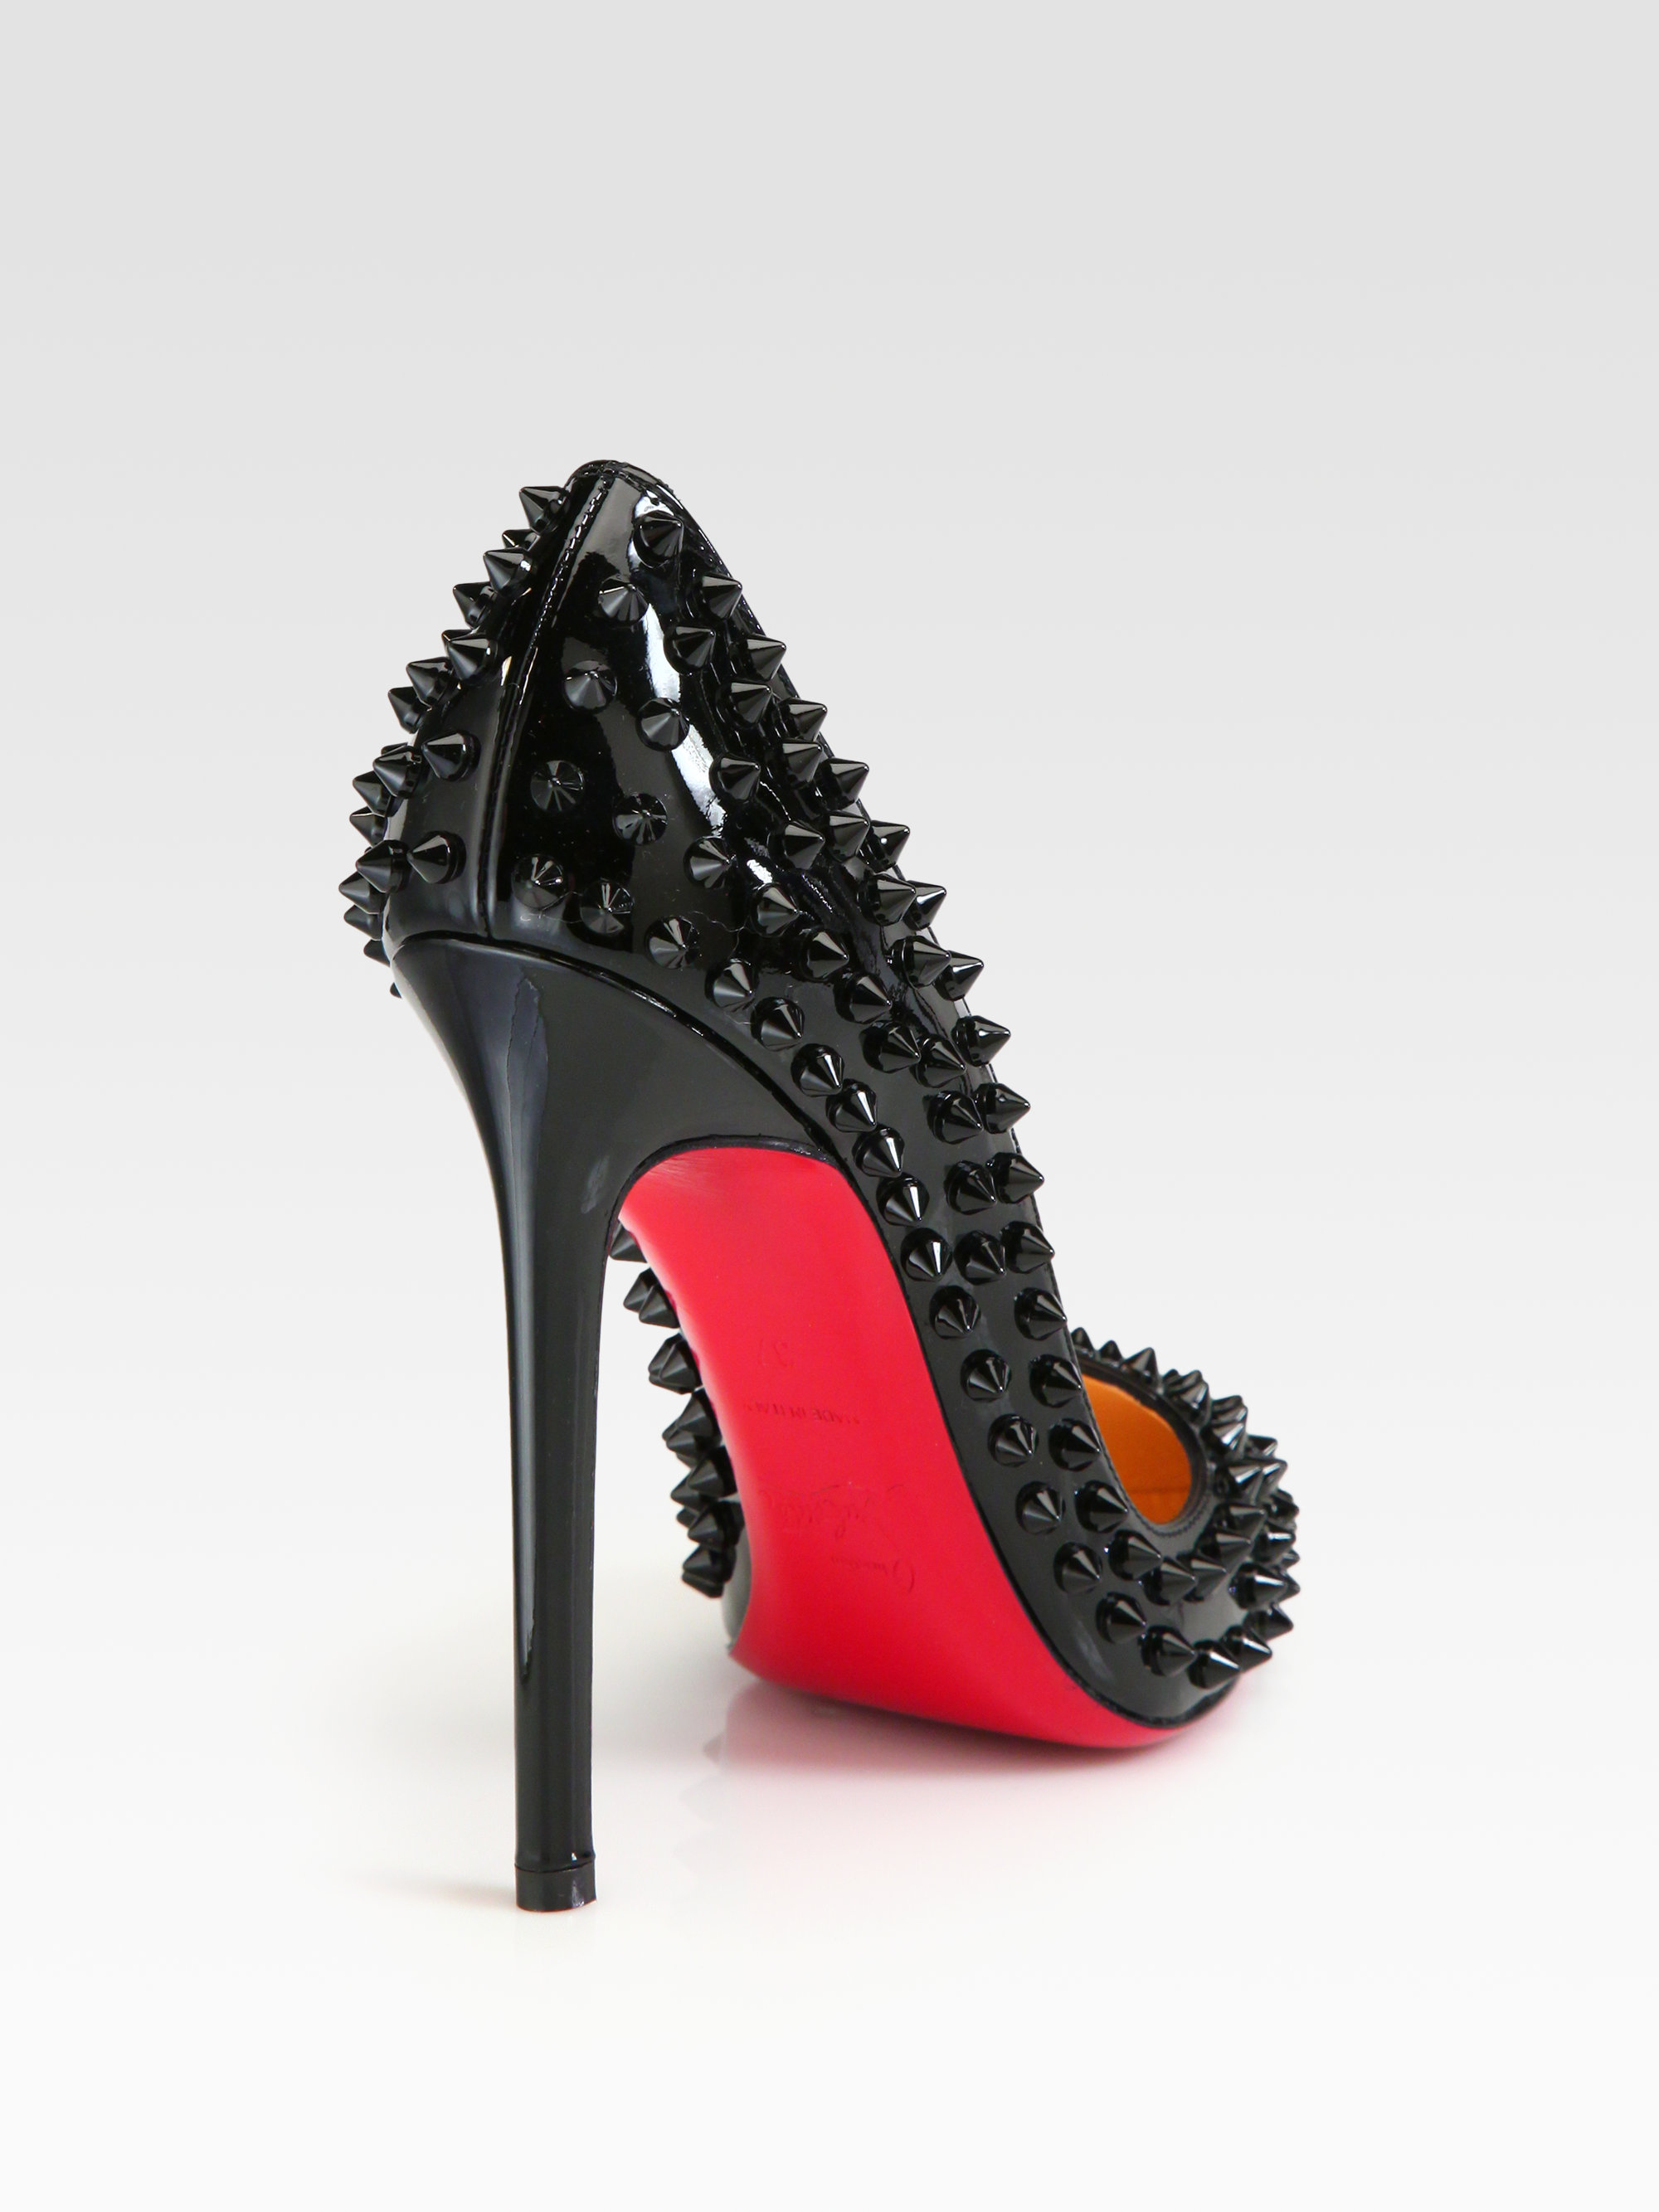 Christian Louboutin, Shoes, Red Bottoms Black With Spikes